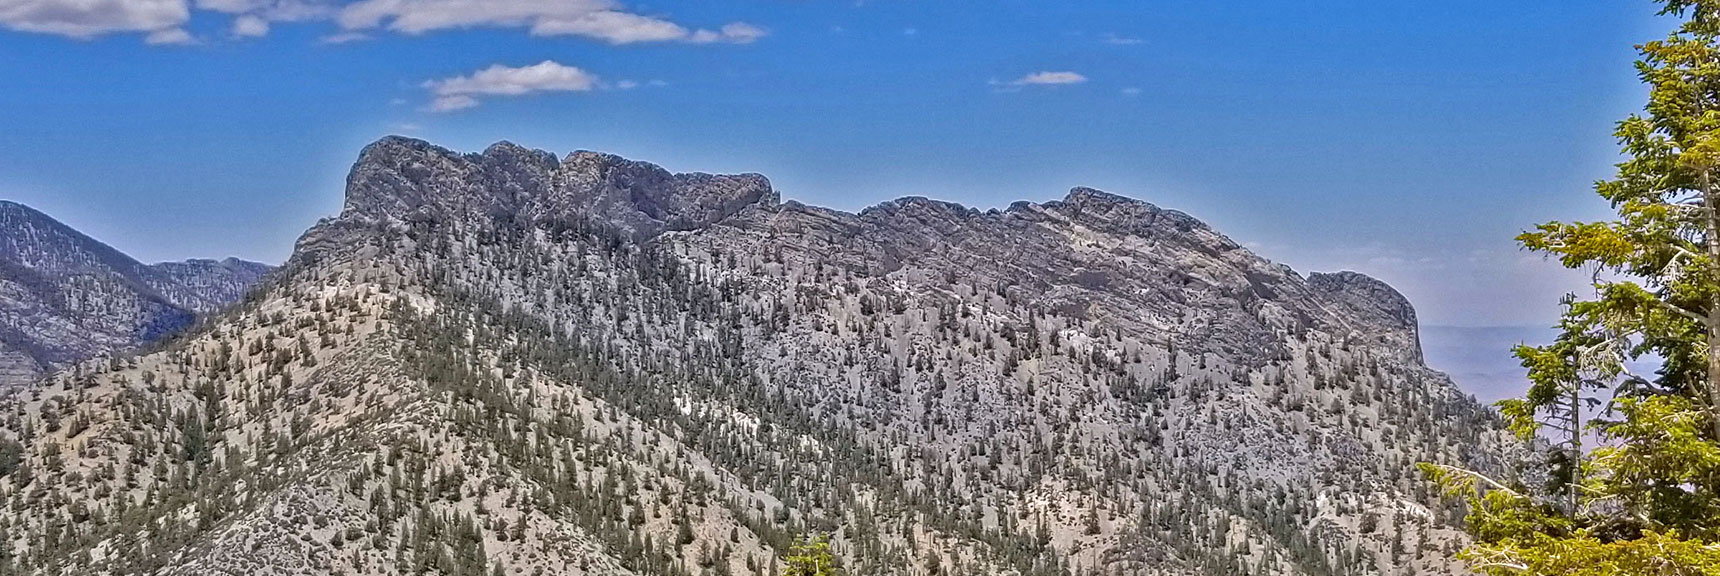 Closer View of Macks Peak. Imagine Traversing from Right to Left Summit Area! | Black Rock Sister | Mt Charleston Wilderness | Lee Canyon | Spring Mountains, Nevada